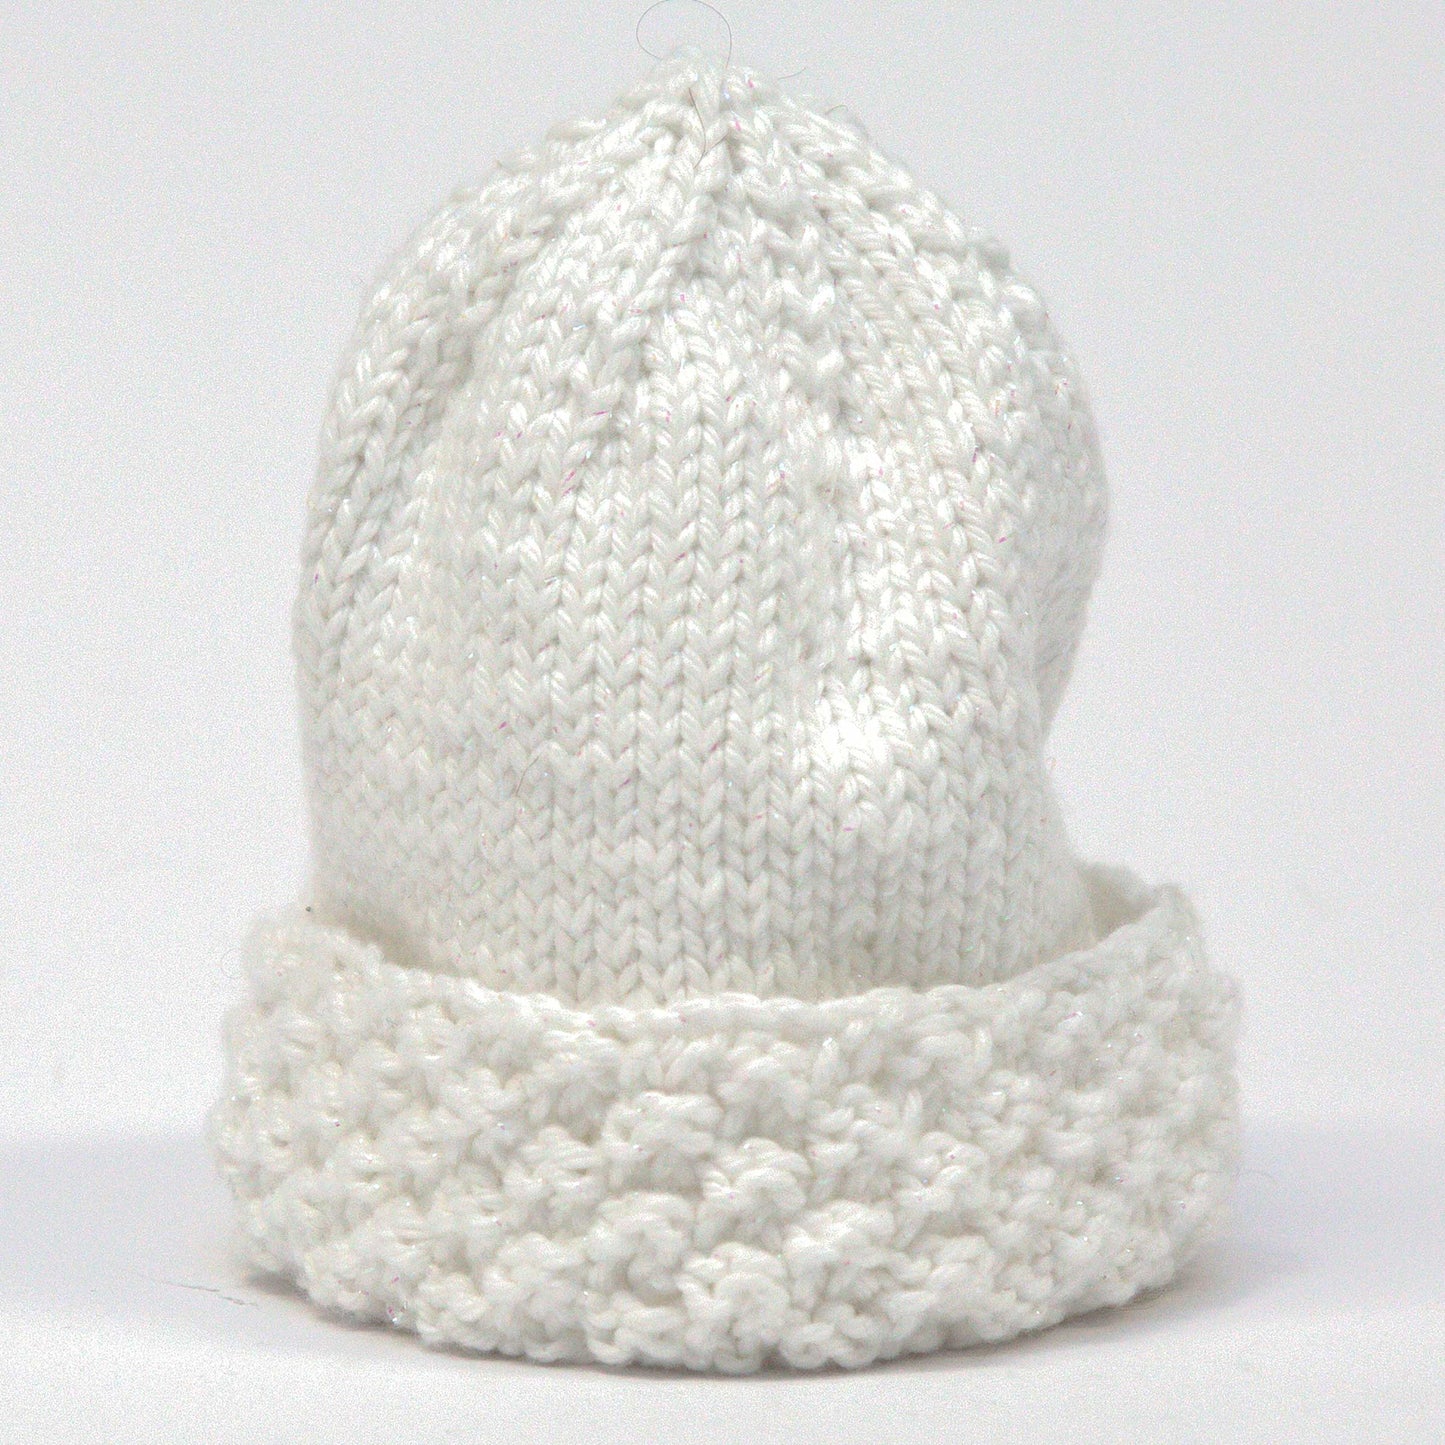 Knitted Baby Hat, Hand Knit, 100% Cotton, Washable, White, White Glitter